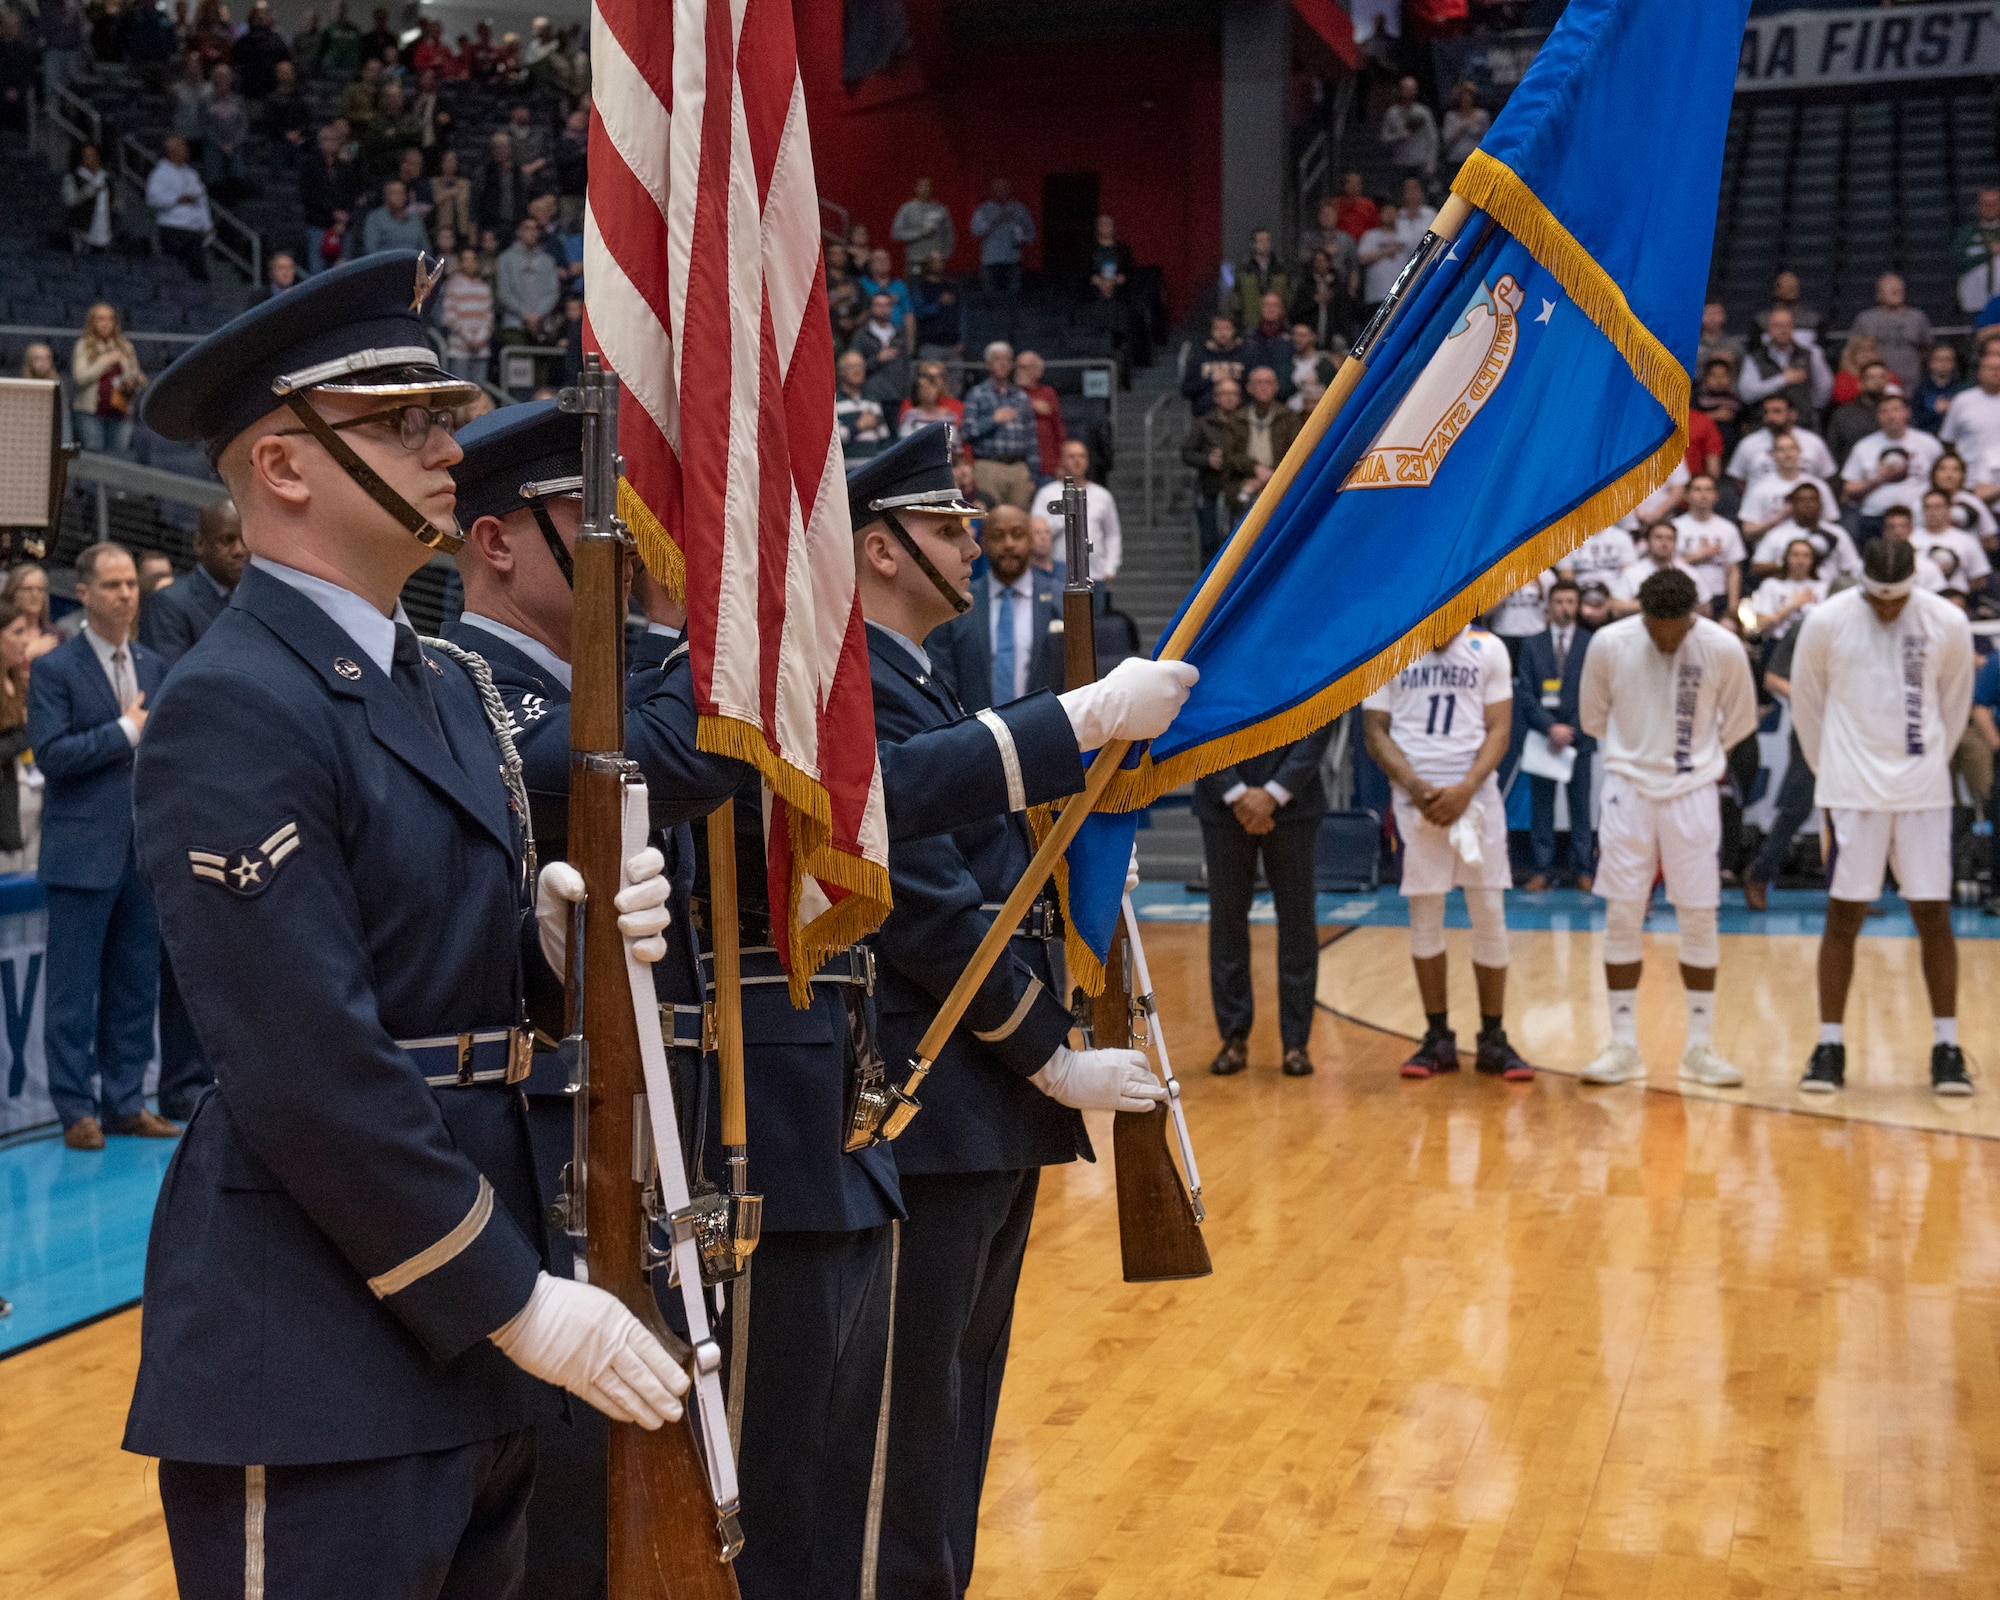 Members of the Wright-Patterson Air Force Base, Ohio Honor Guard present the colors during the pregame ceremonies of the NCAA First Four Tournament March 19, 2019. (U.S. Air Force photo by Michelle Gigante)